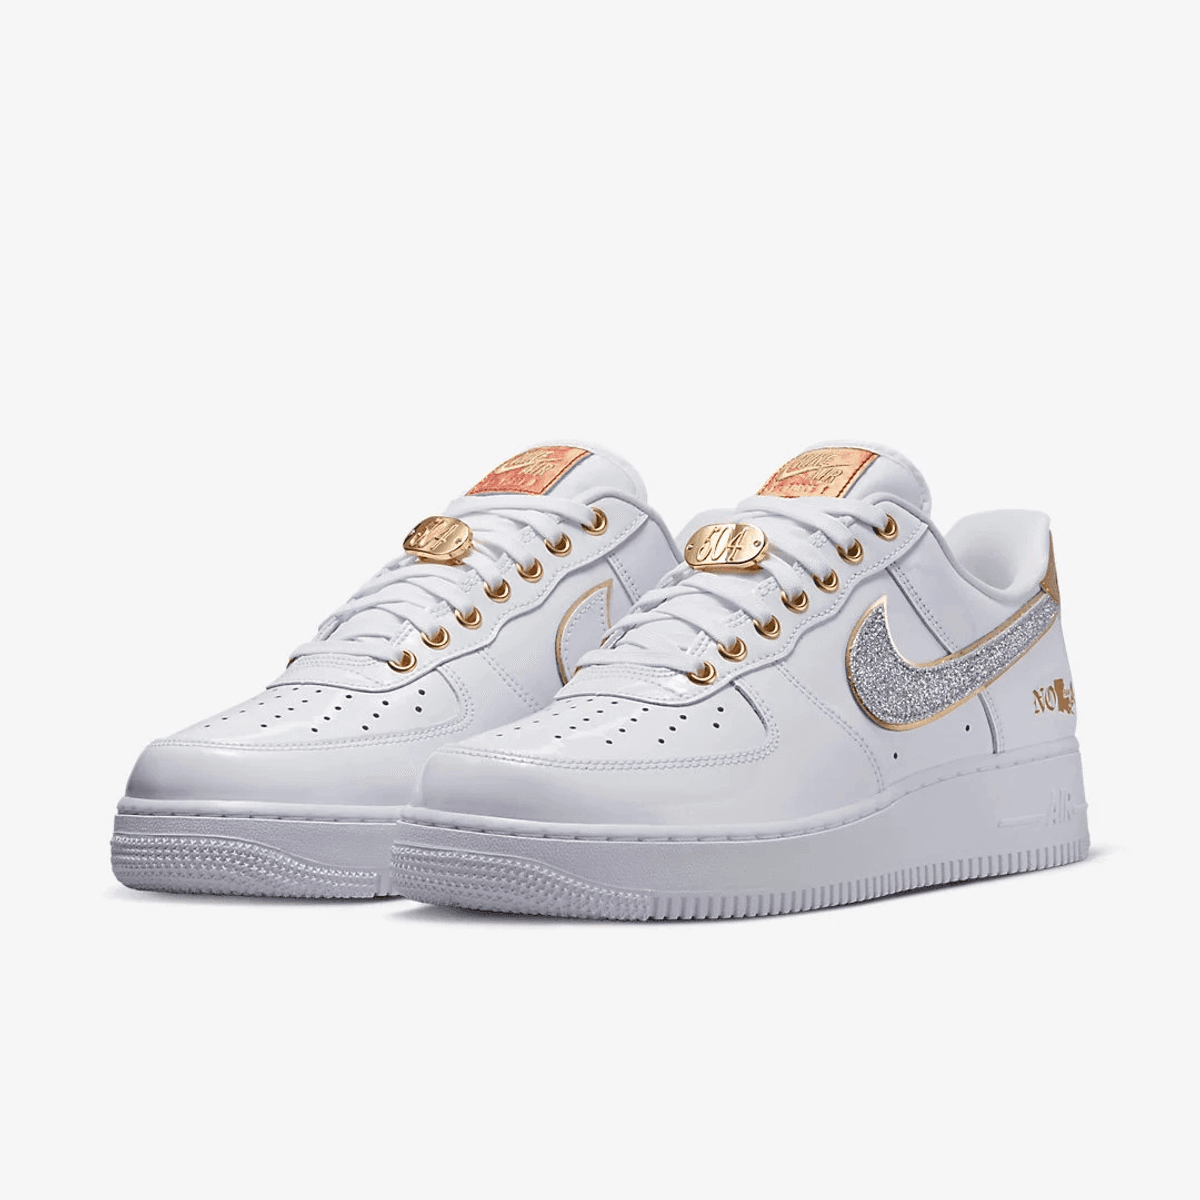 Nike Is Giving New Orleans Its Very Own Air Force 1 Low Dubbed The NOLA